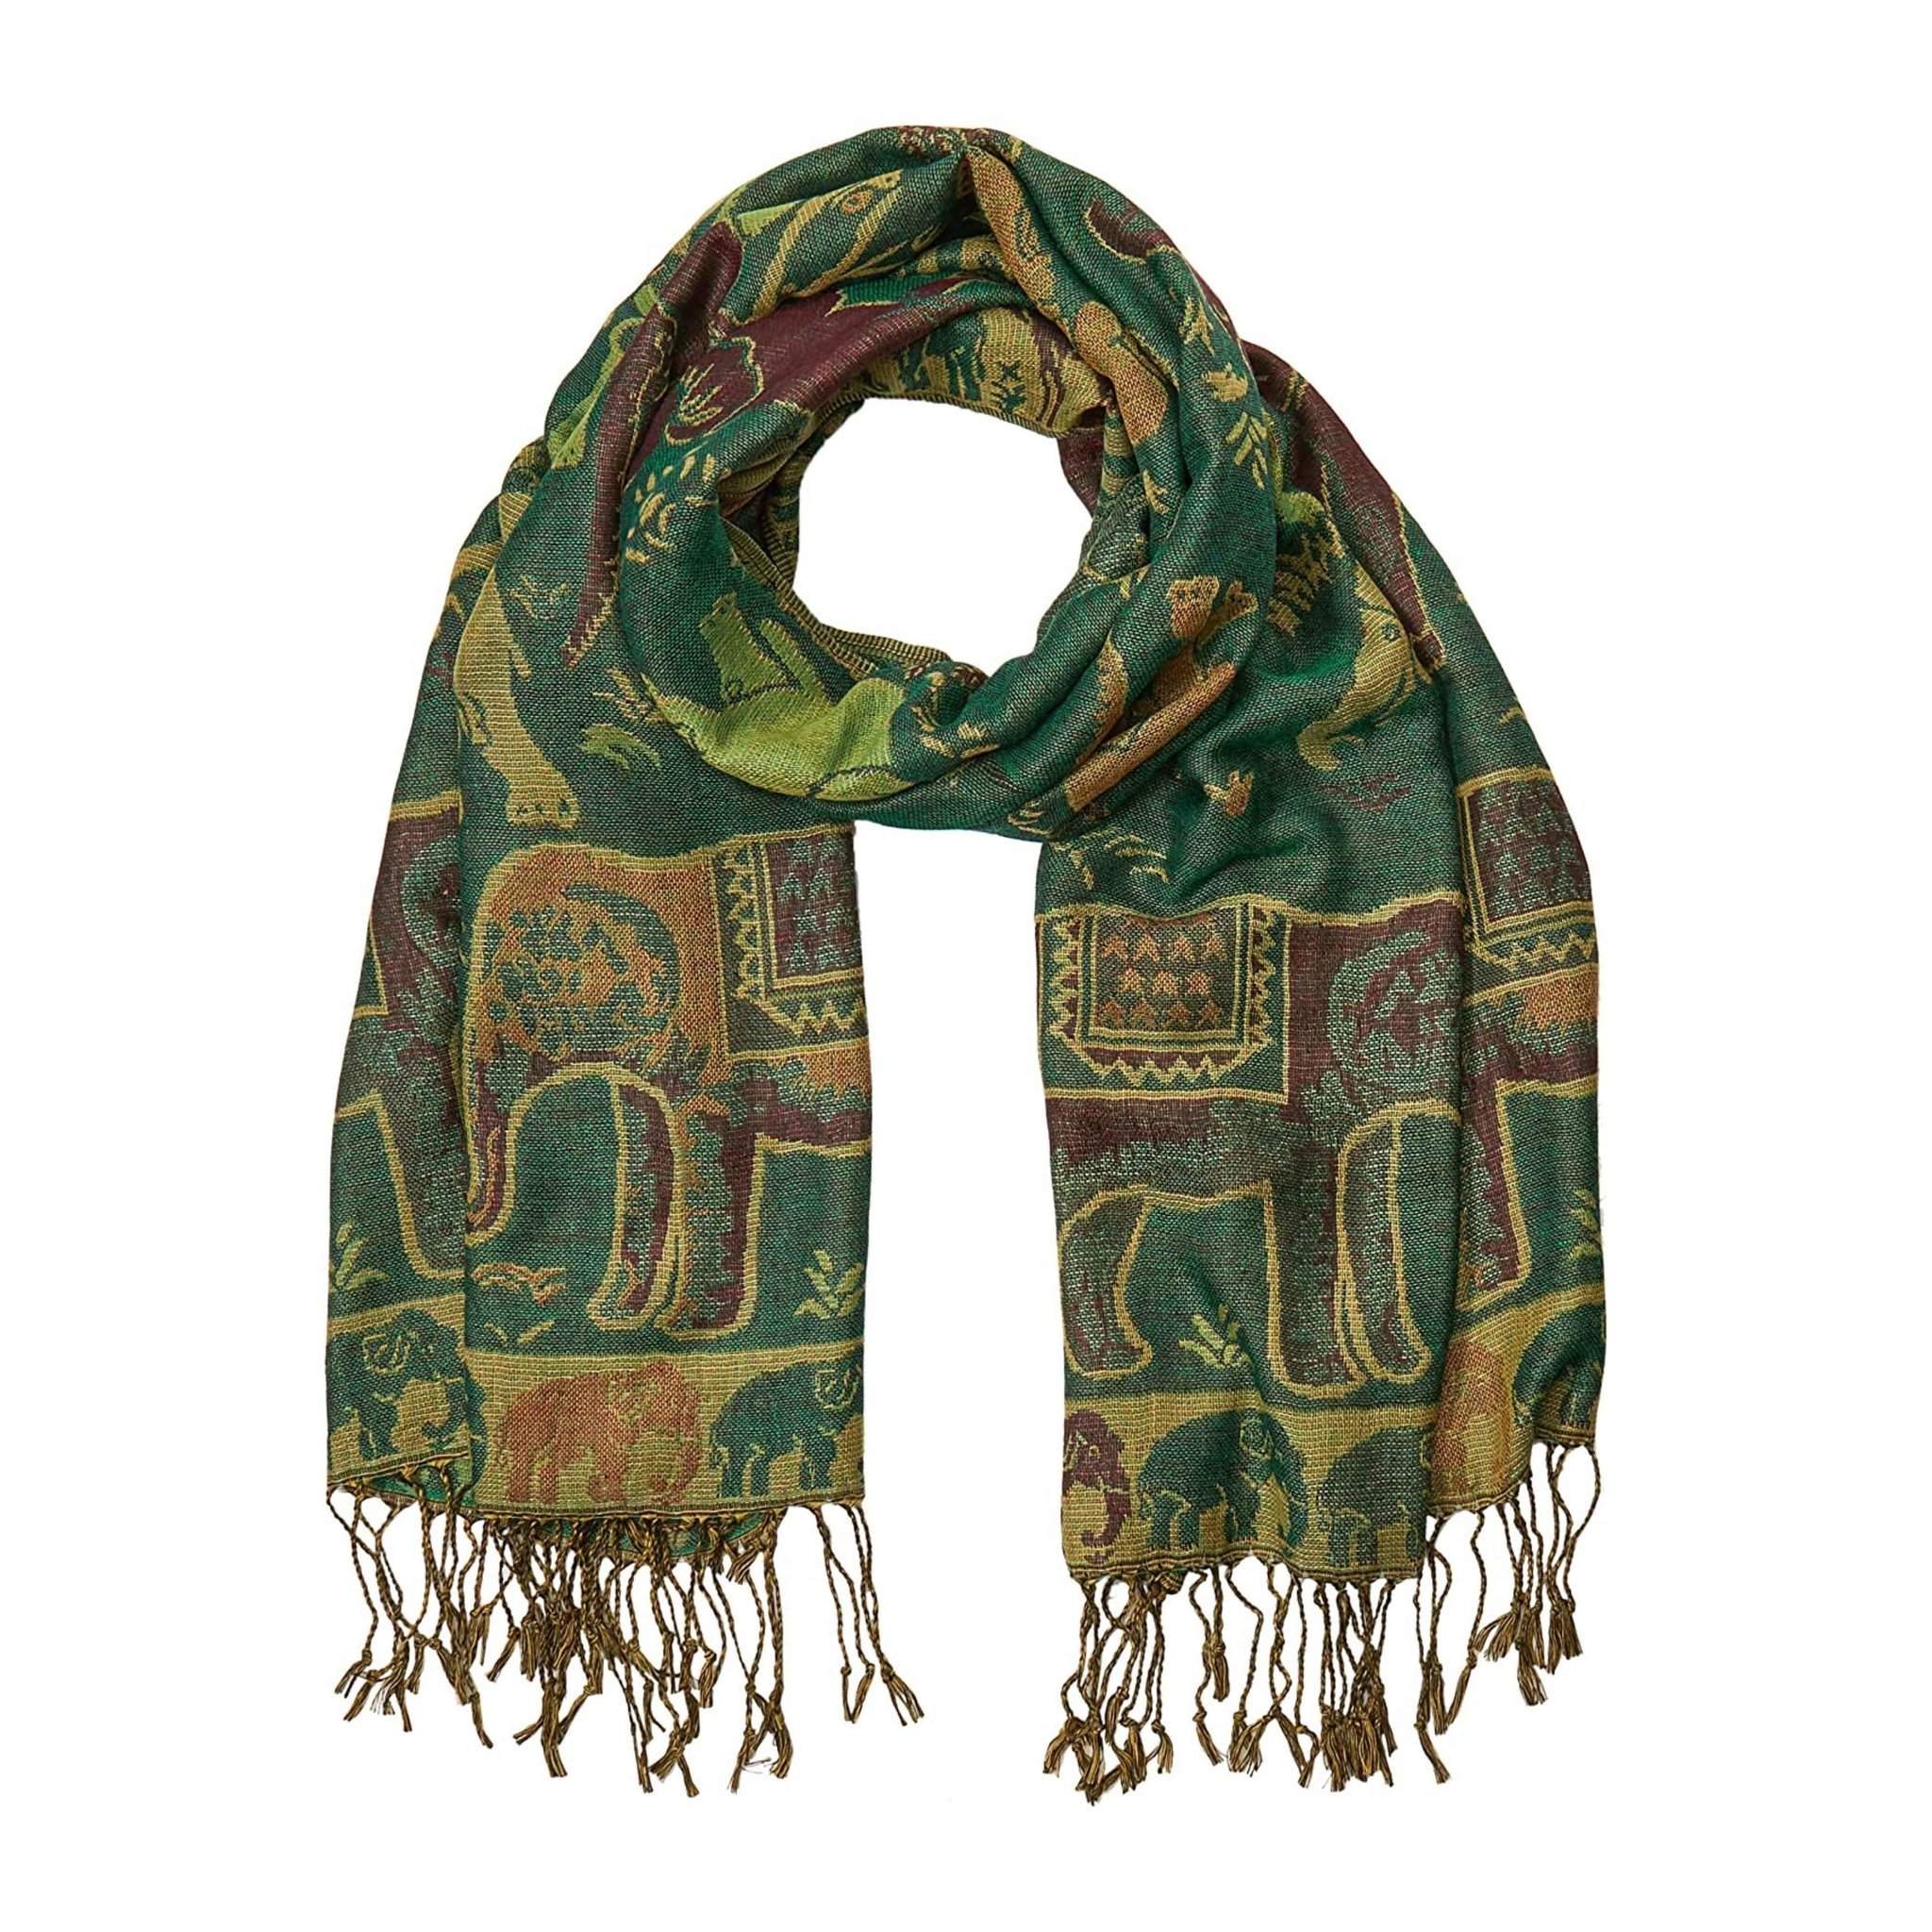 BALI ELEPHANT SCARF Elepanta Scarves - Buy Today Elephant Pants Jewelry And Bohemian Clothes Handmade In Thailand Help To Save The Elephants FairTrade And Vegan